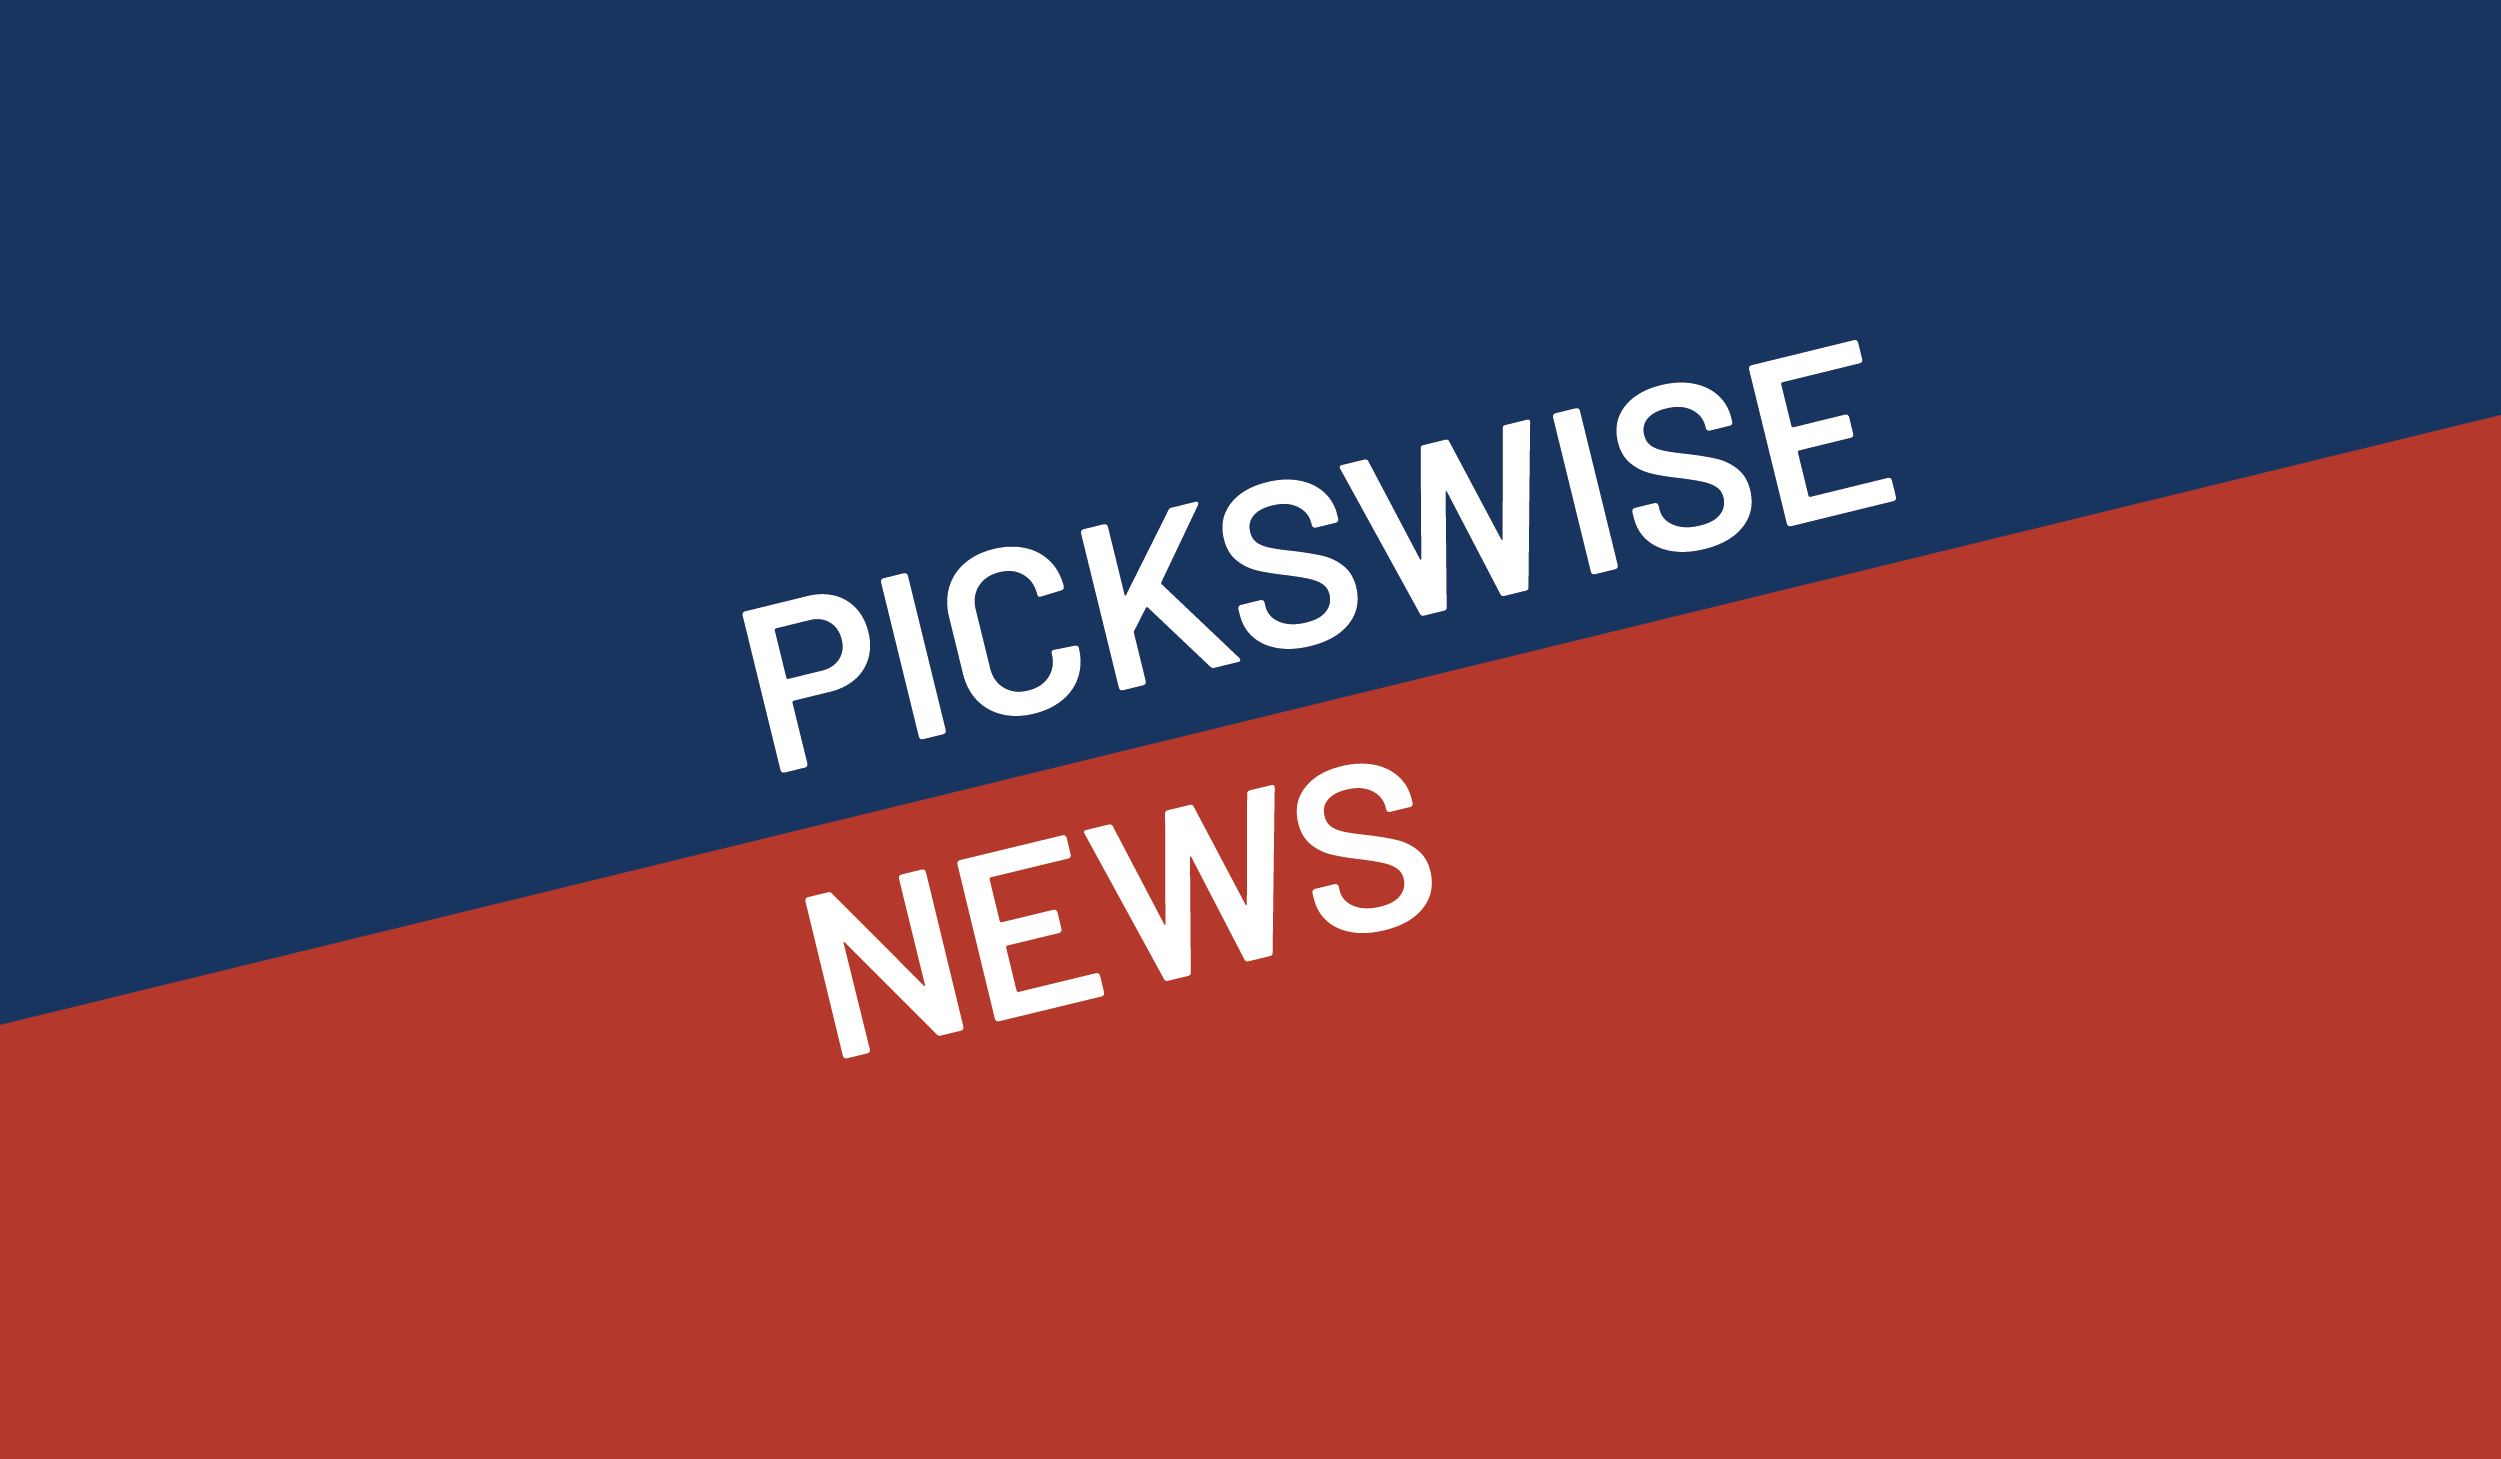 Pickswise news cover image